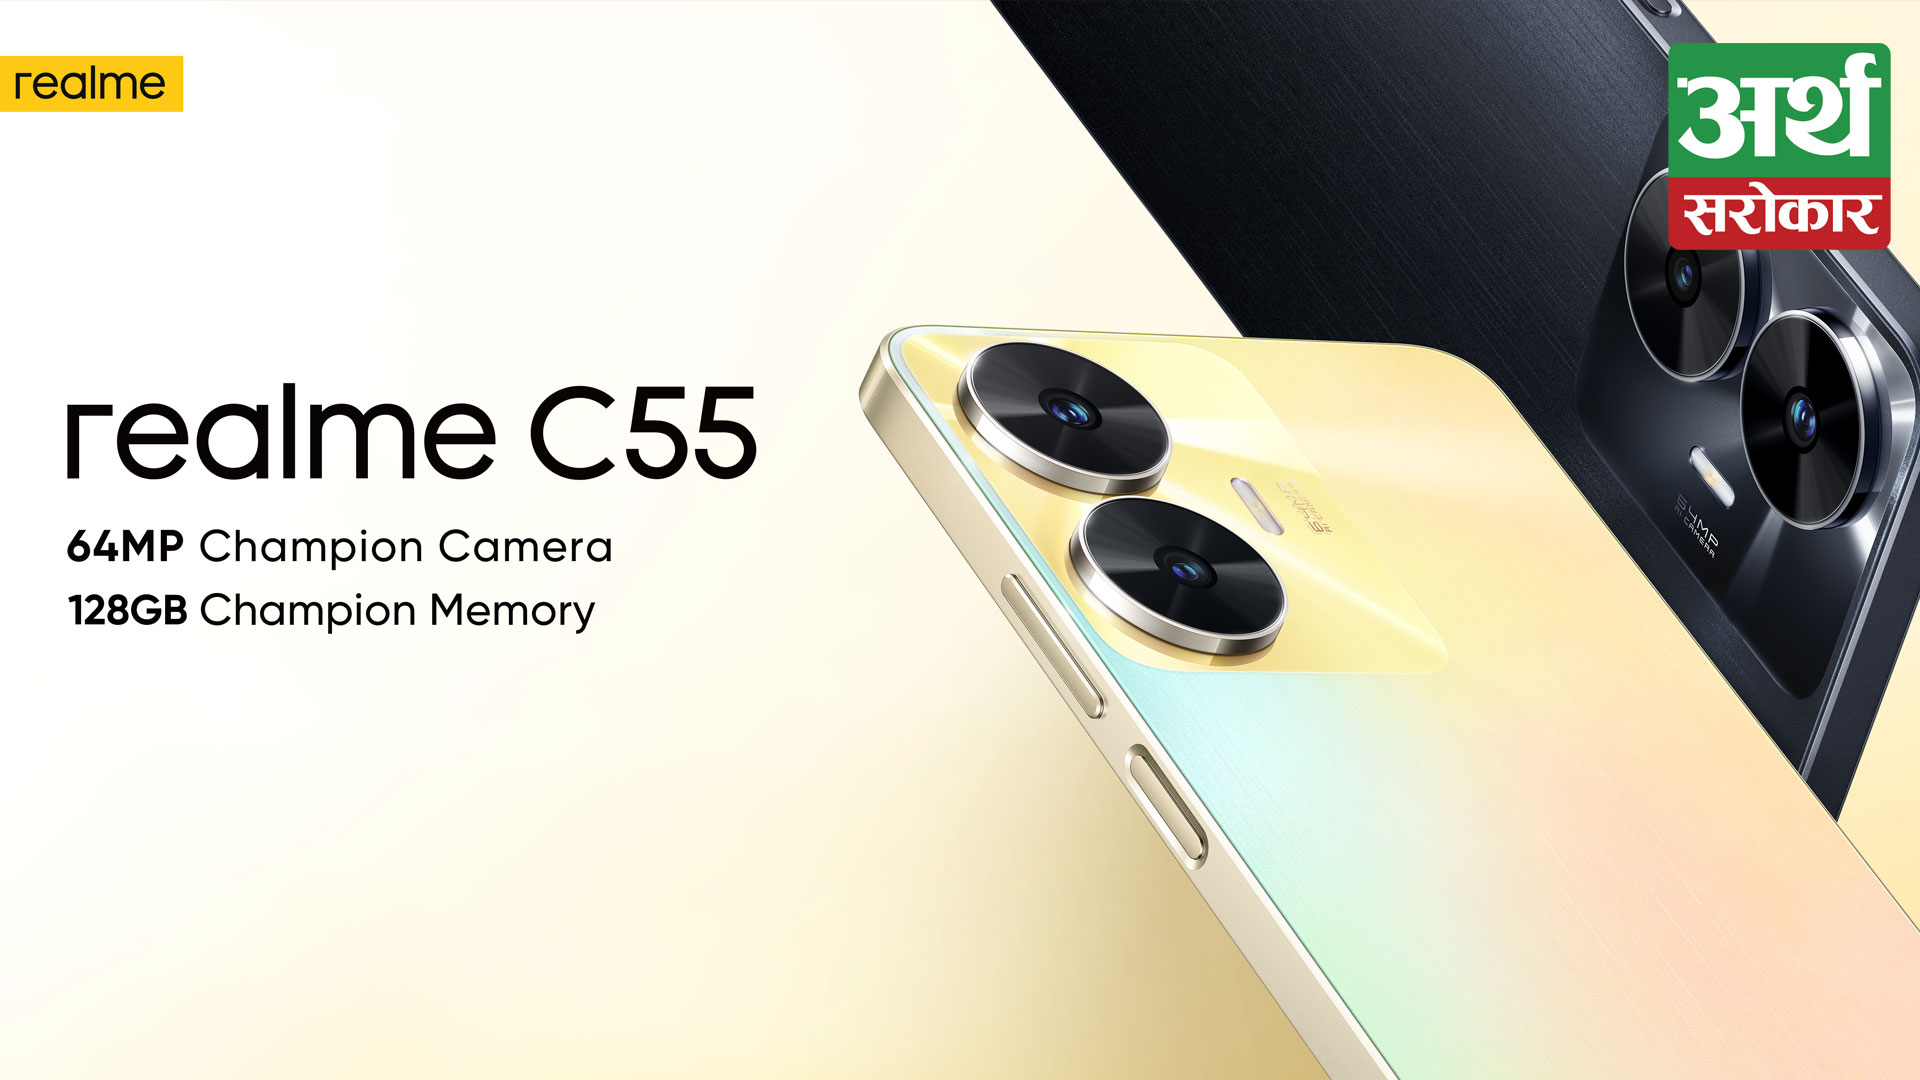 Get Ready to Capture Life in High Definition with the realme C55